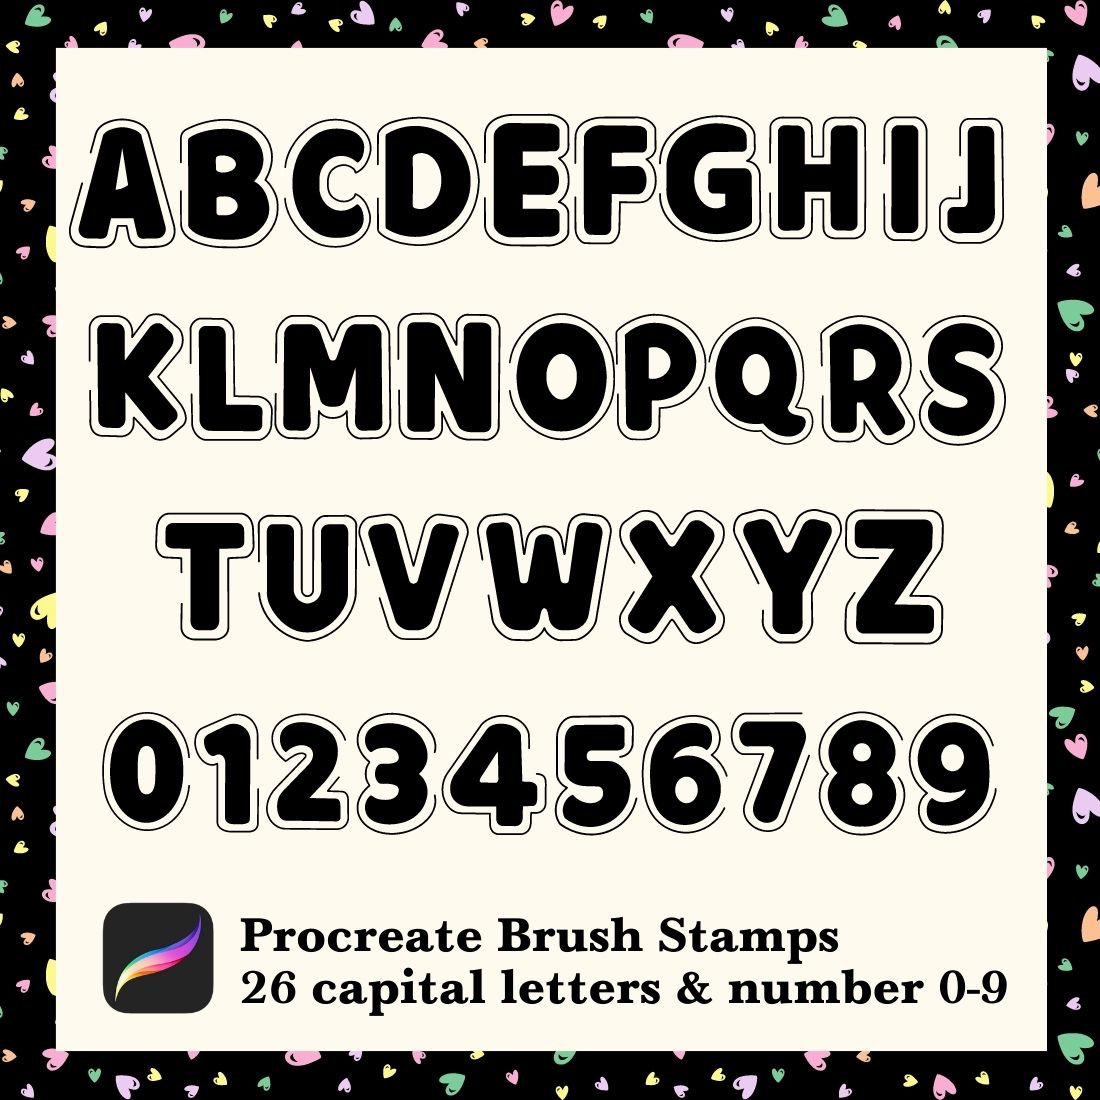 Alphabet & Number Brush Stamp Procreate preview image.